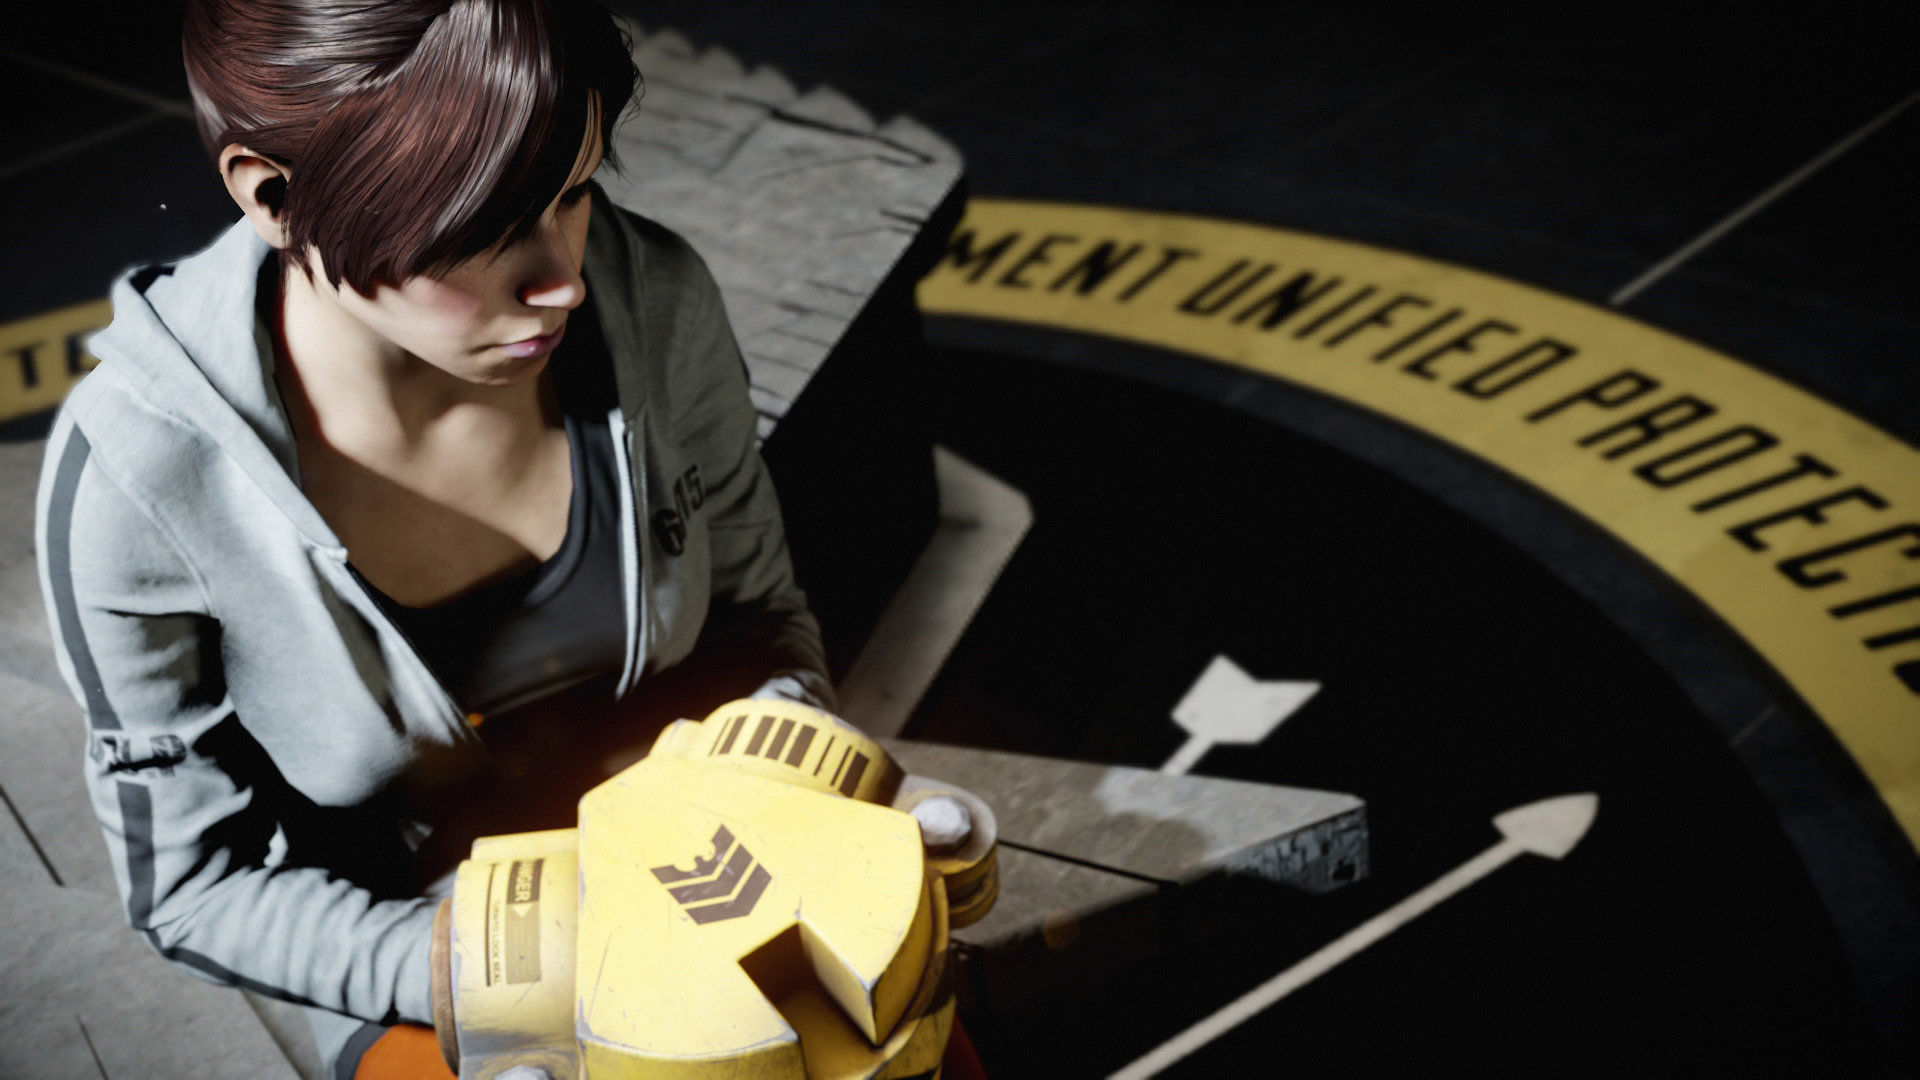 inFamous: First Light #6